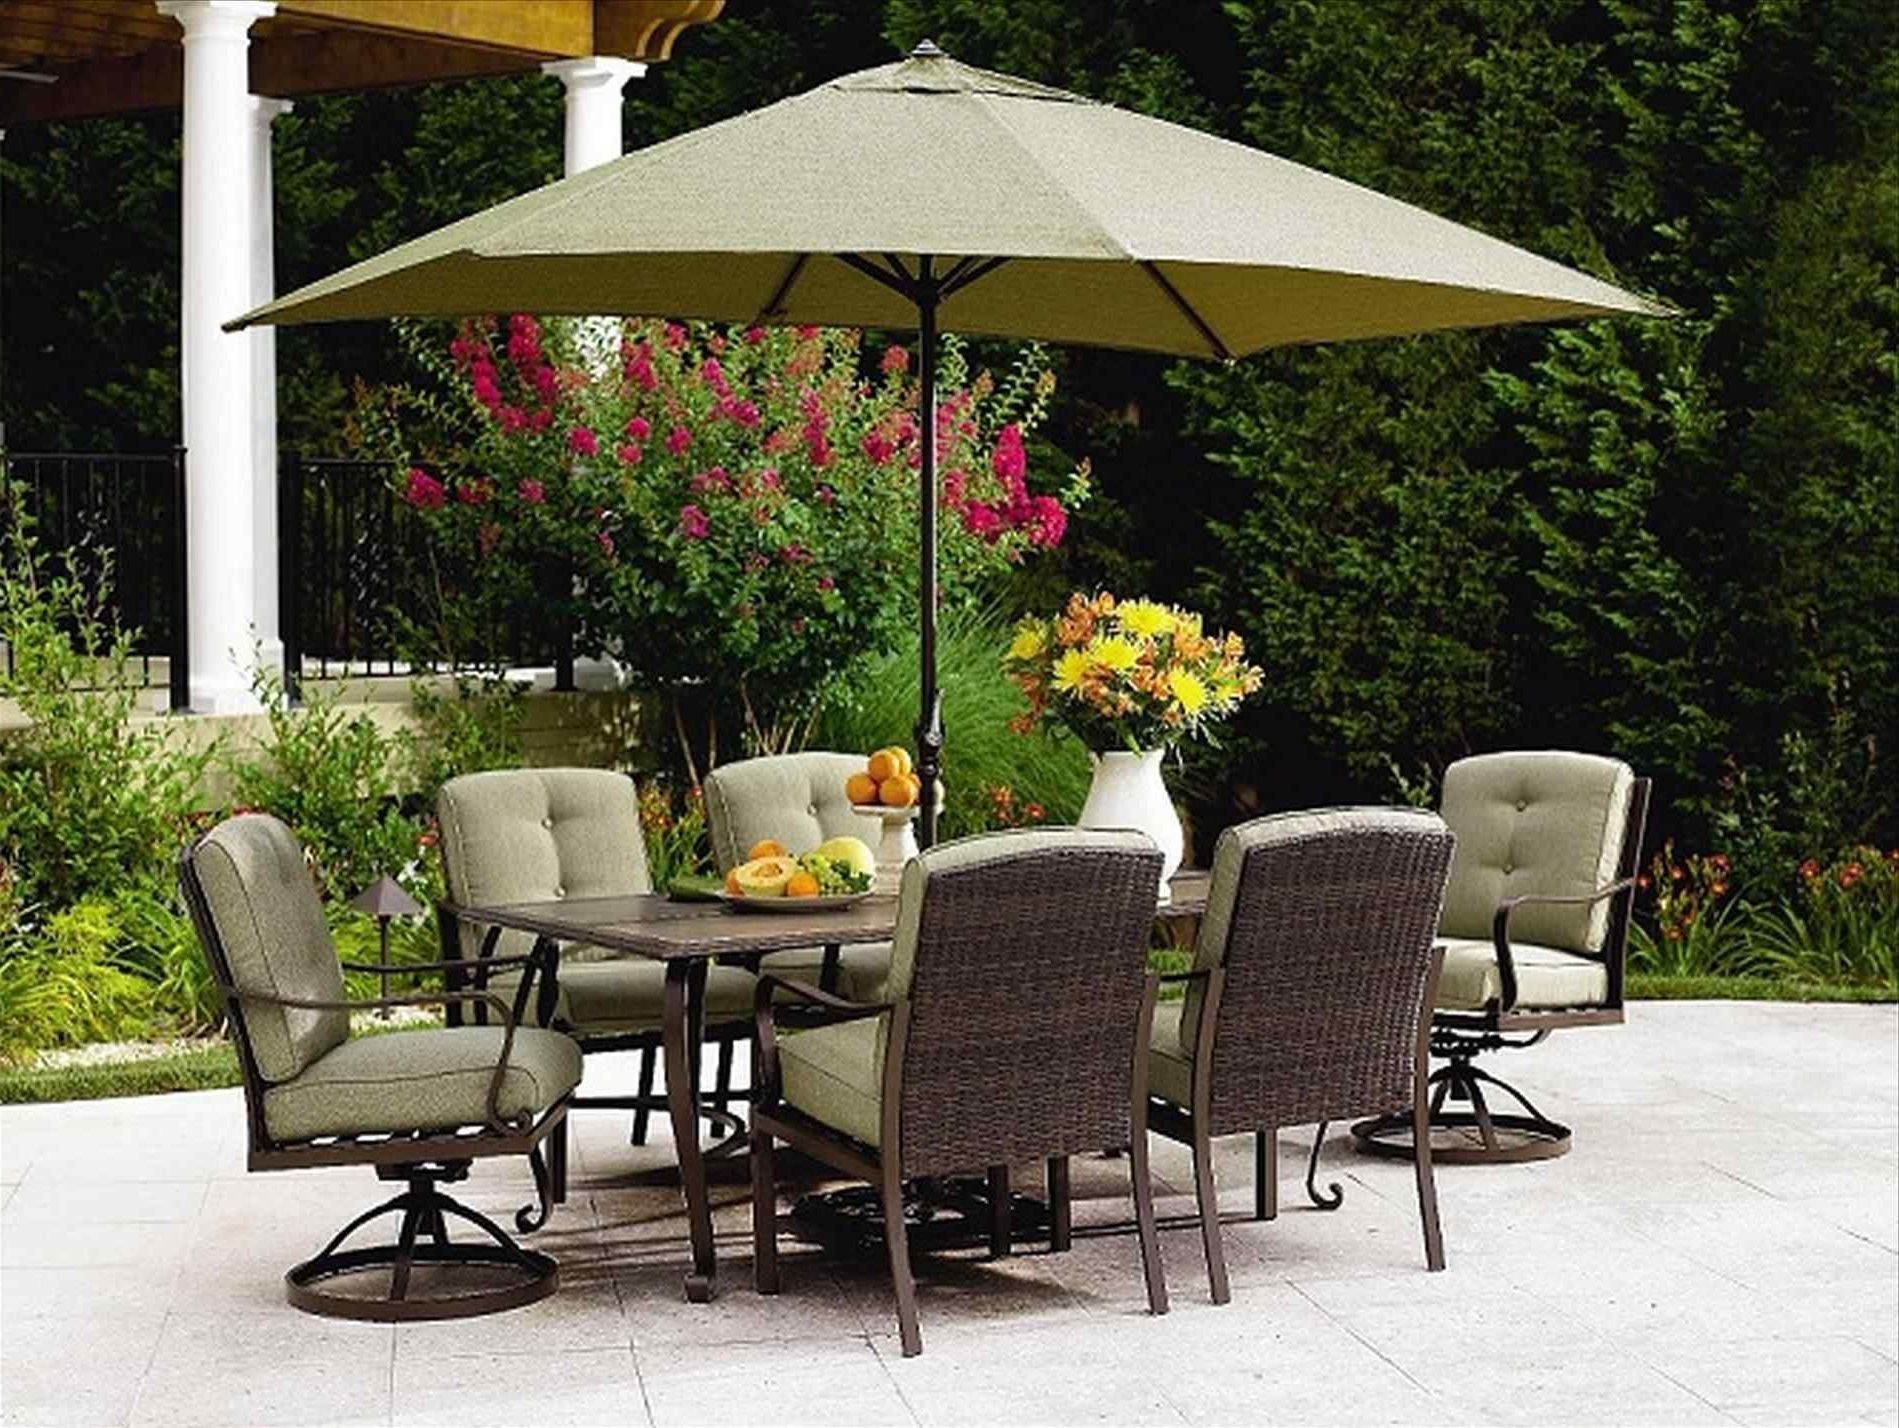 Patio Furniture Sets With Umbrellas In Popular Round Outdoor Dining Table With Umbrella Patio Furniture Sets For  (View 1 of 20)